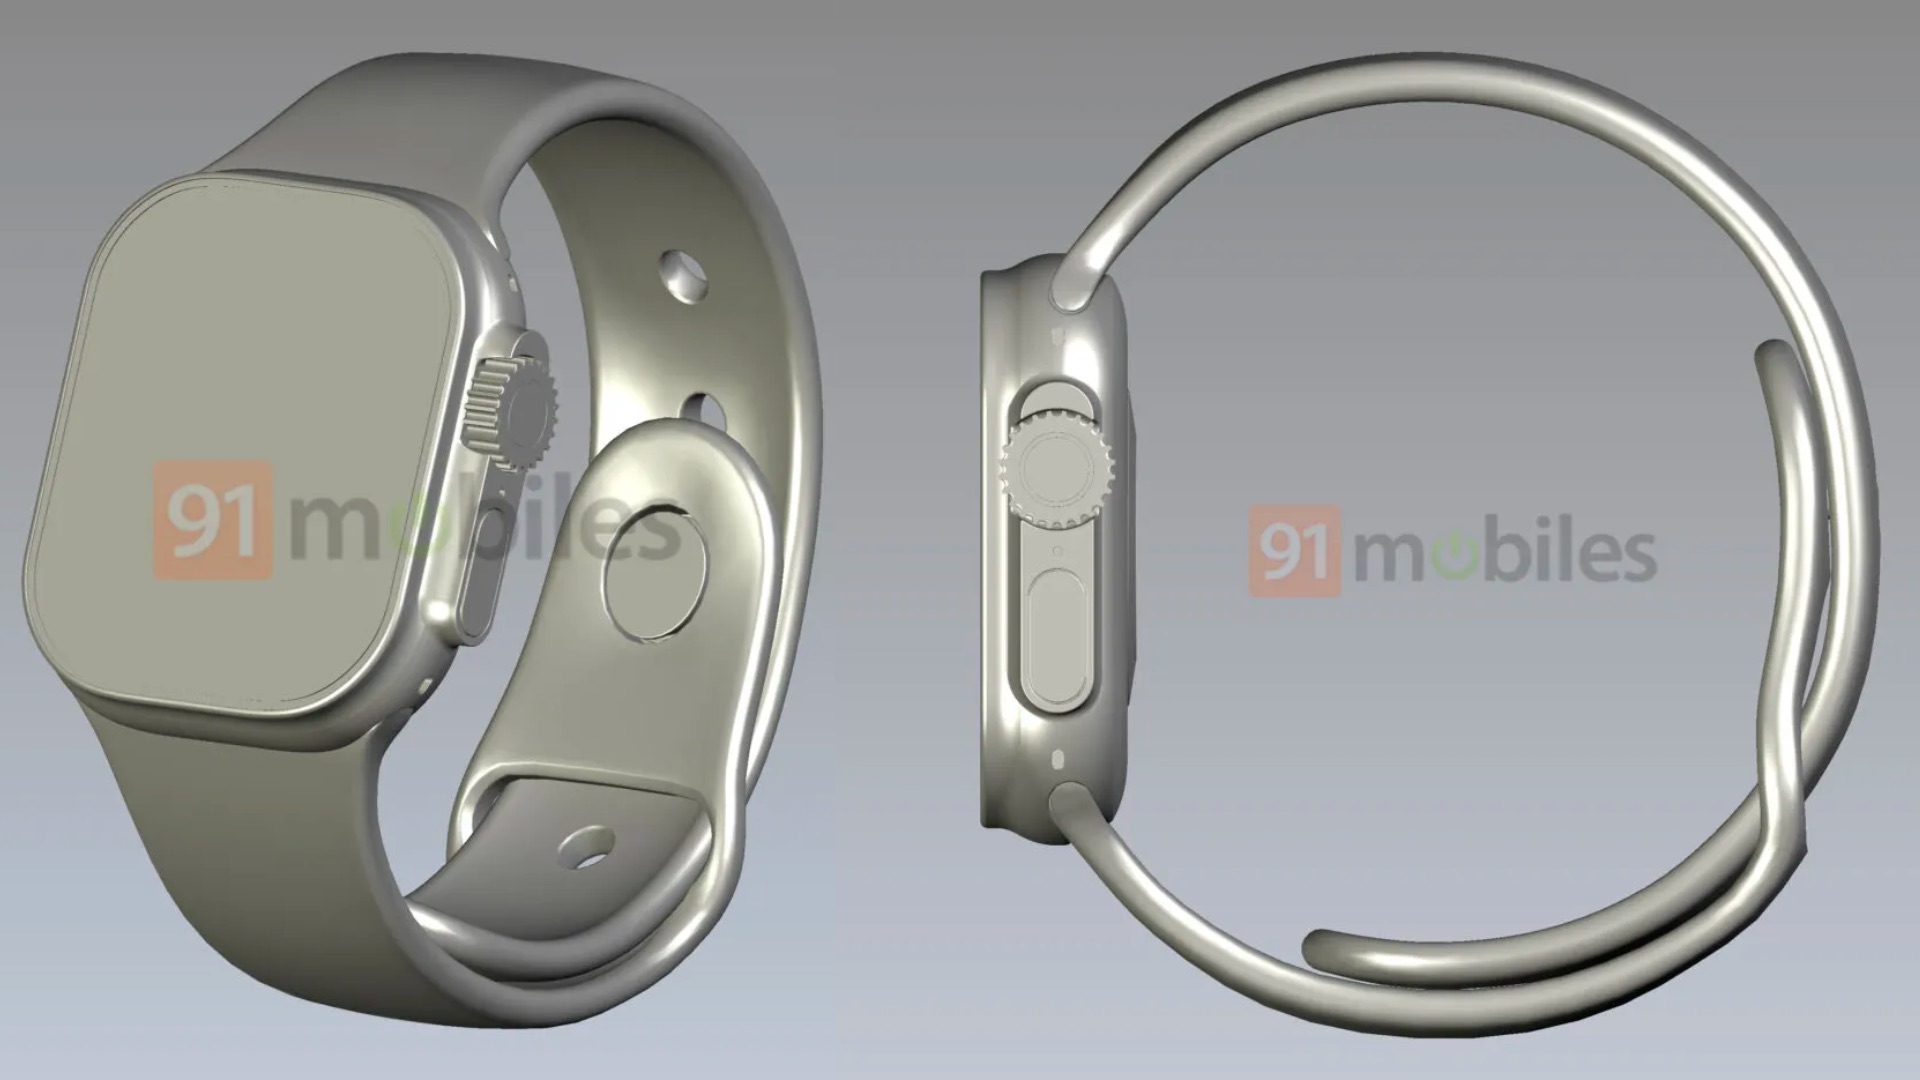 Apple Watch ‘Pro’ CAD Shows Flat Screen Design With Extra Button, Protrusion Housing Digital Crown and Side Button